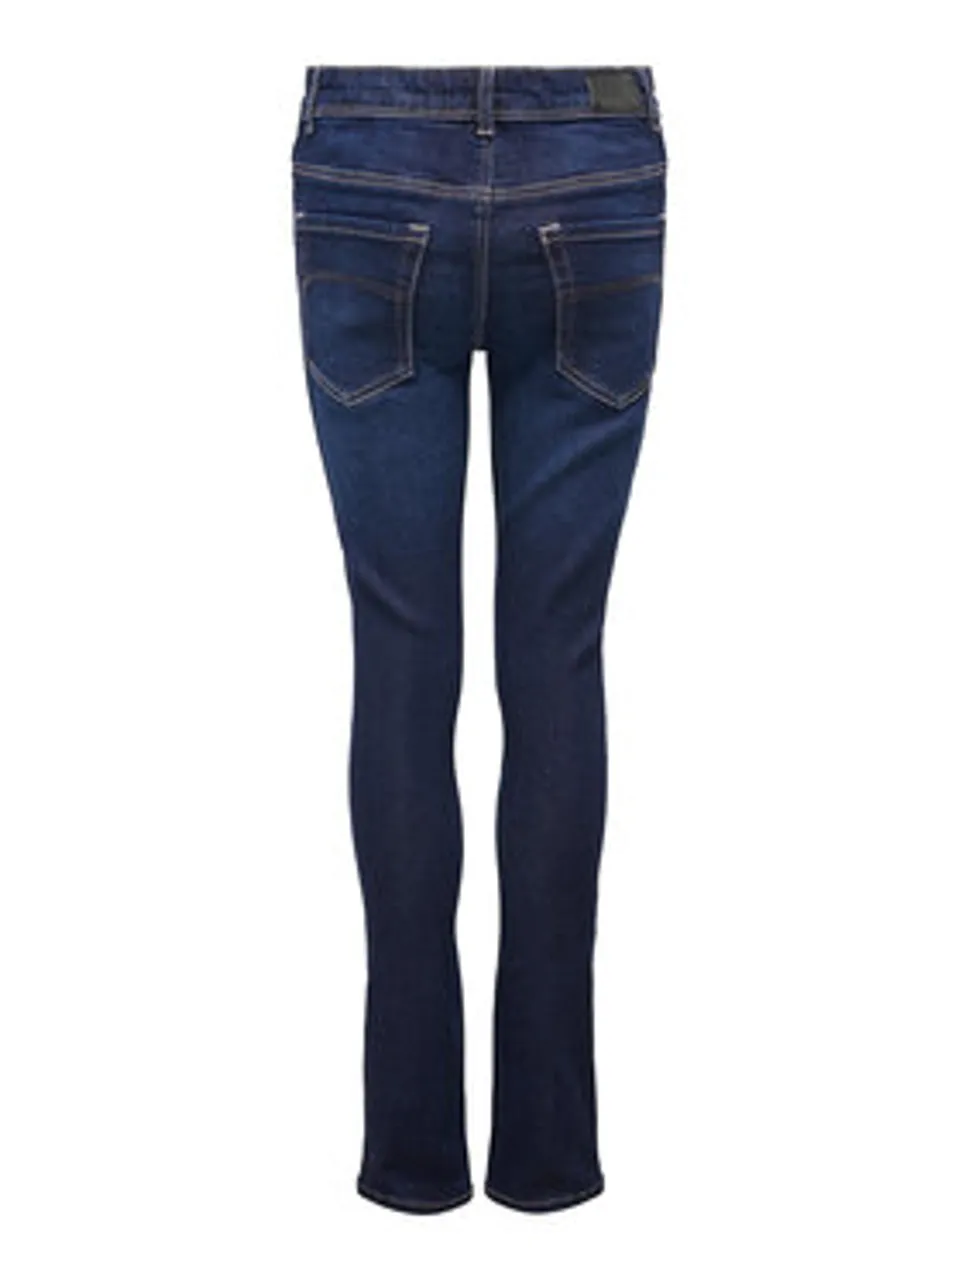 Kids ONLY Jeans Jerry 15256590 Dunkelblau Skinny Fit